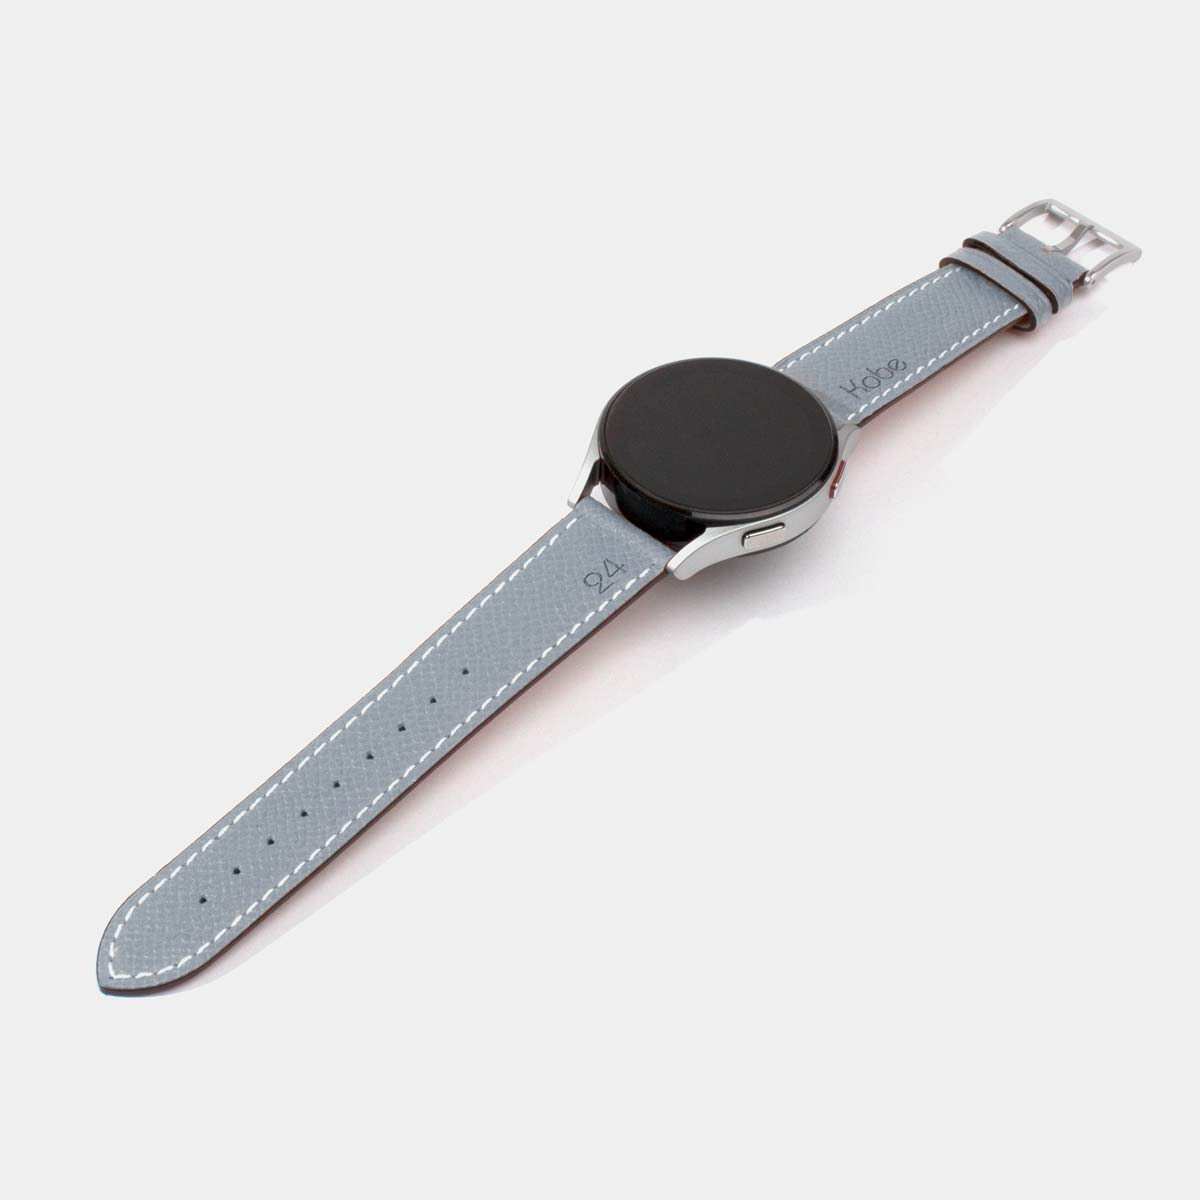 Customized Lettering Watch Strap | Samsung Smart Watch | Jessenia Original Jessenia Original